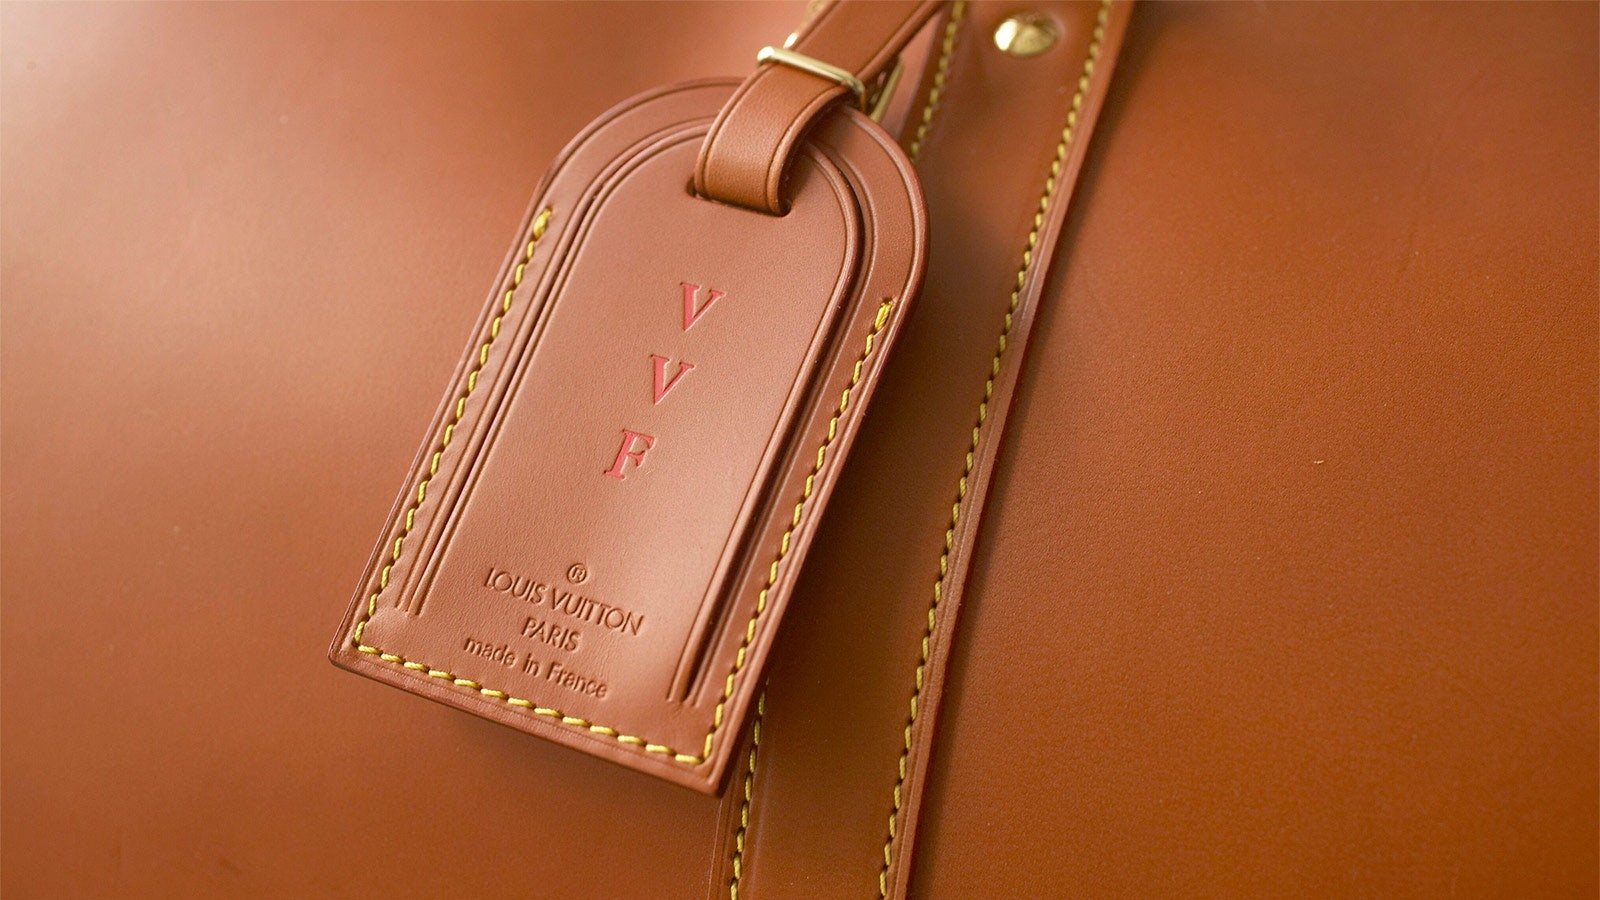 Louis Vuitton's hot stamping service